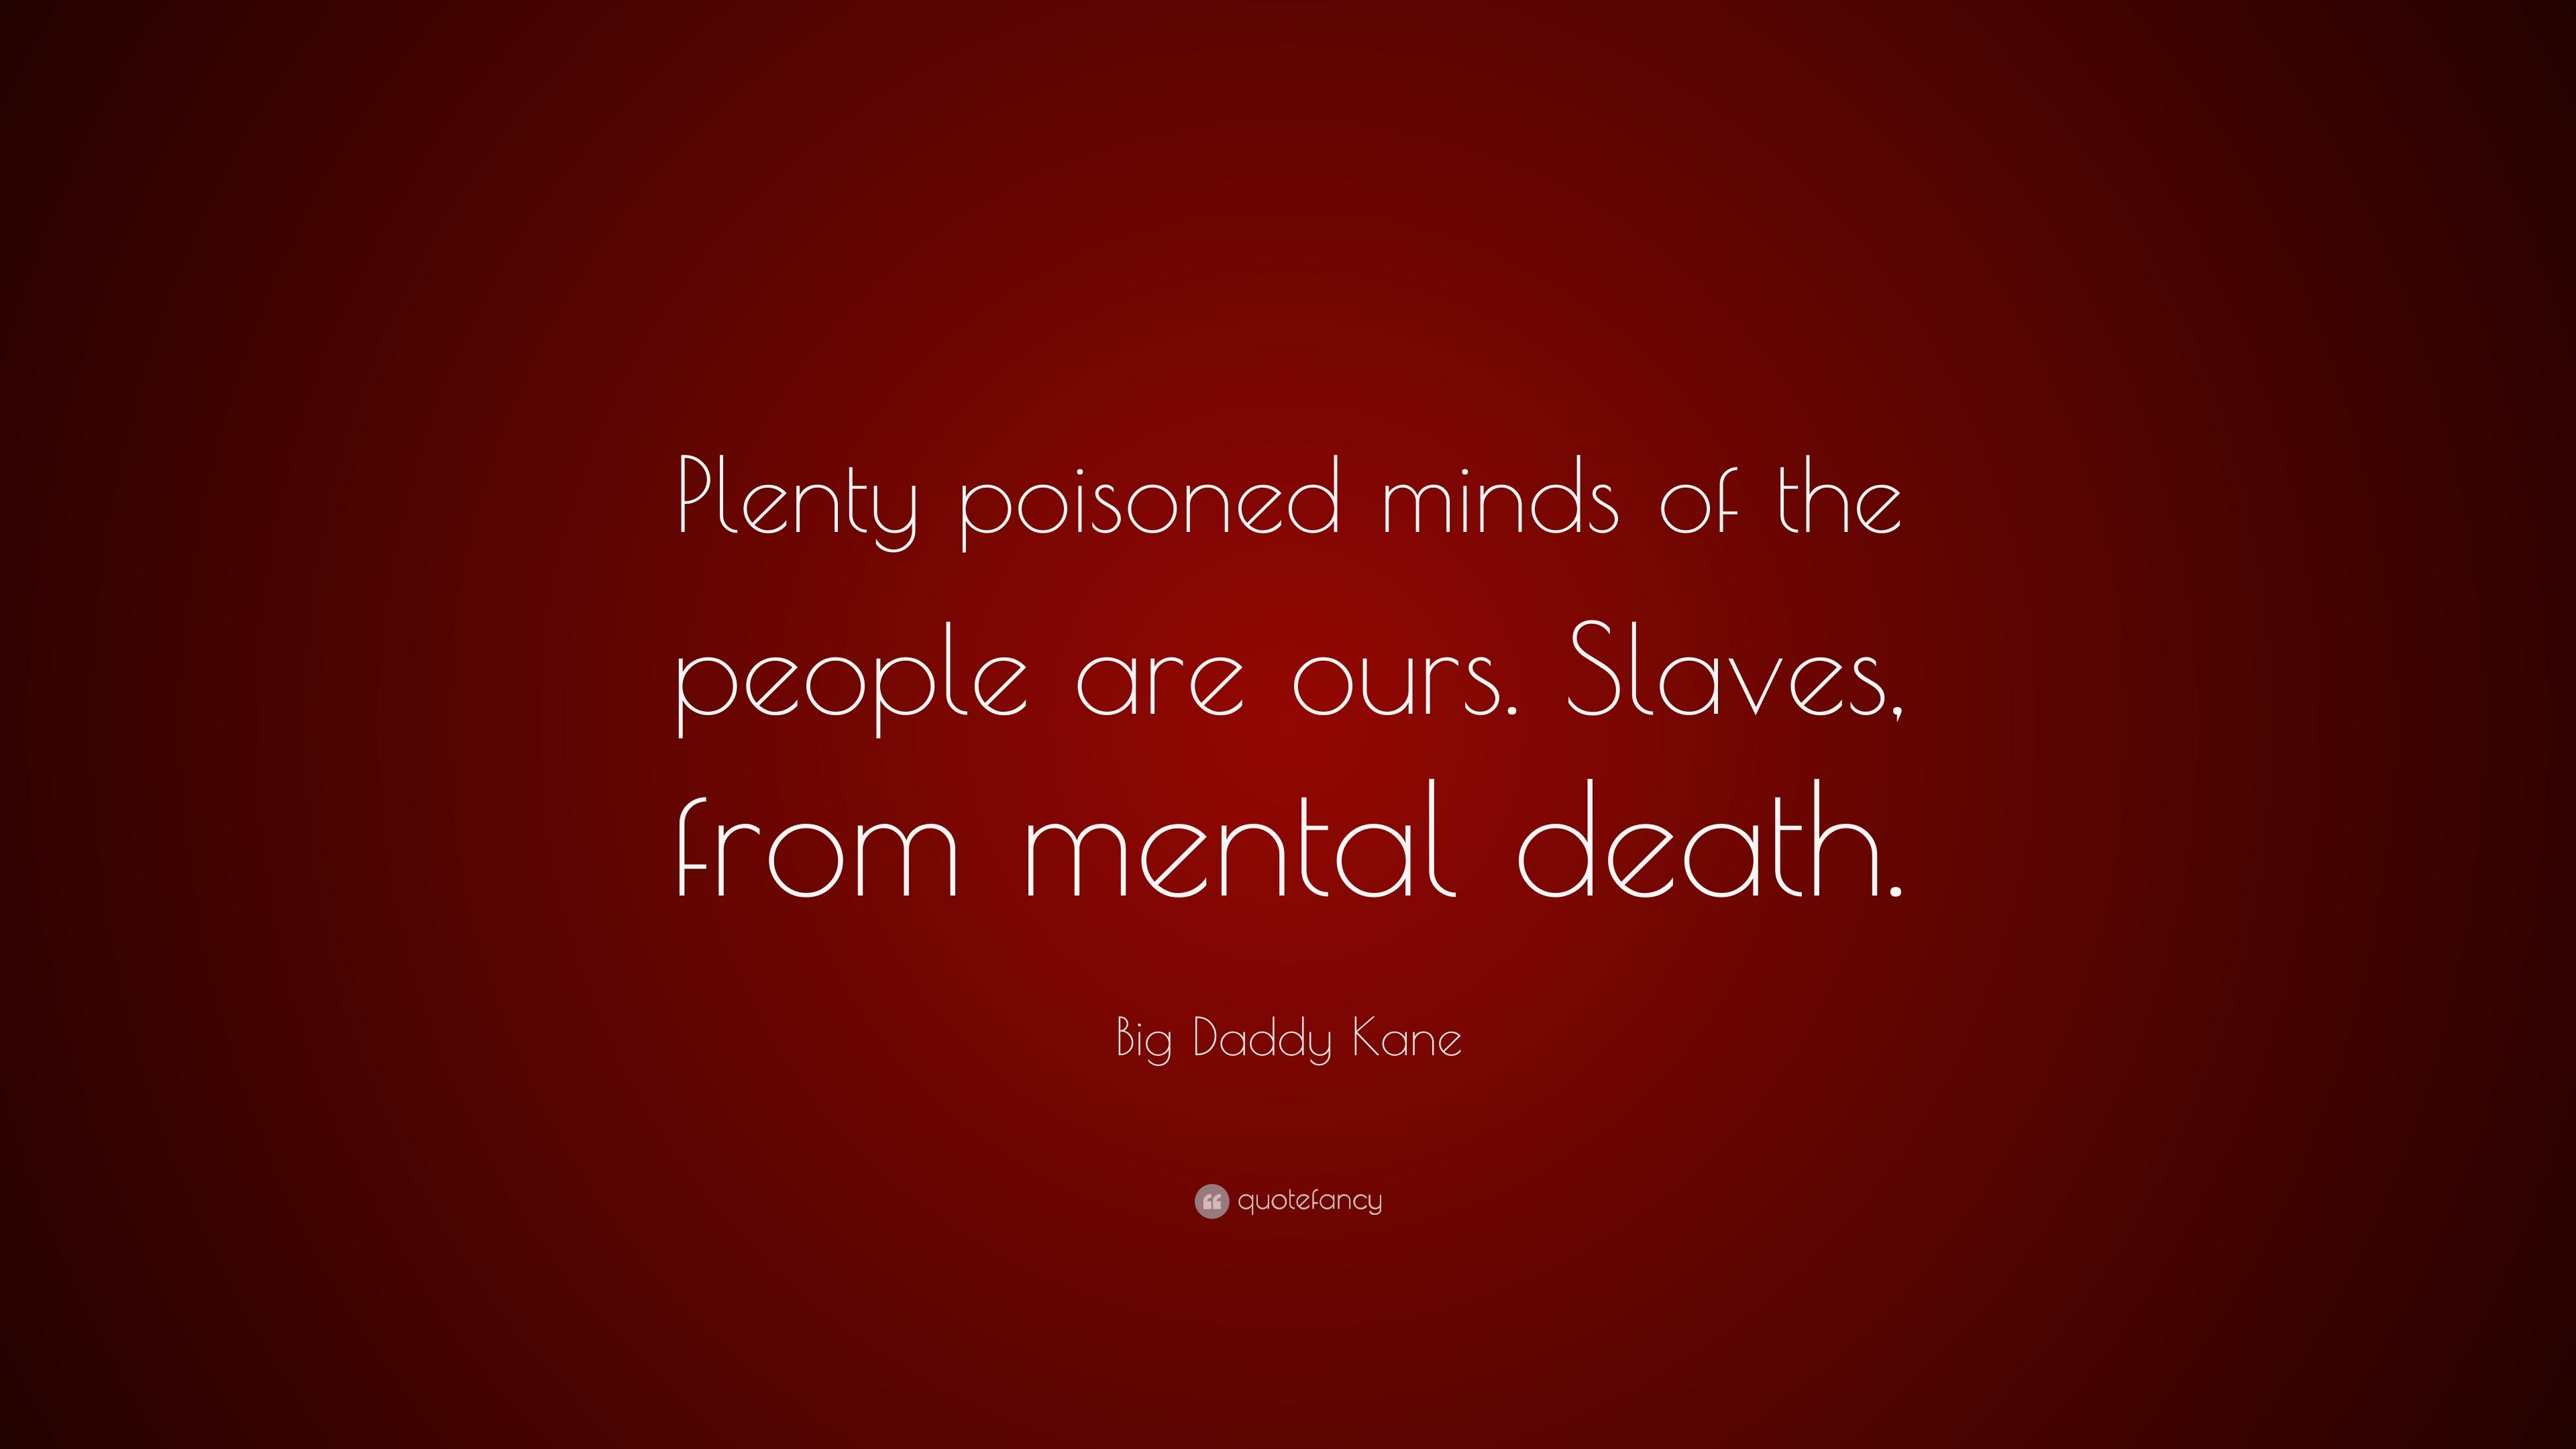 Big Daddy Kane Quote: “Plenty poisoned minds of the people are ours